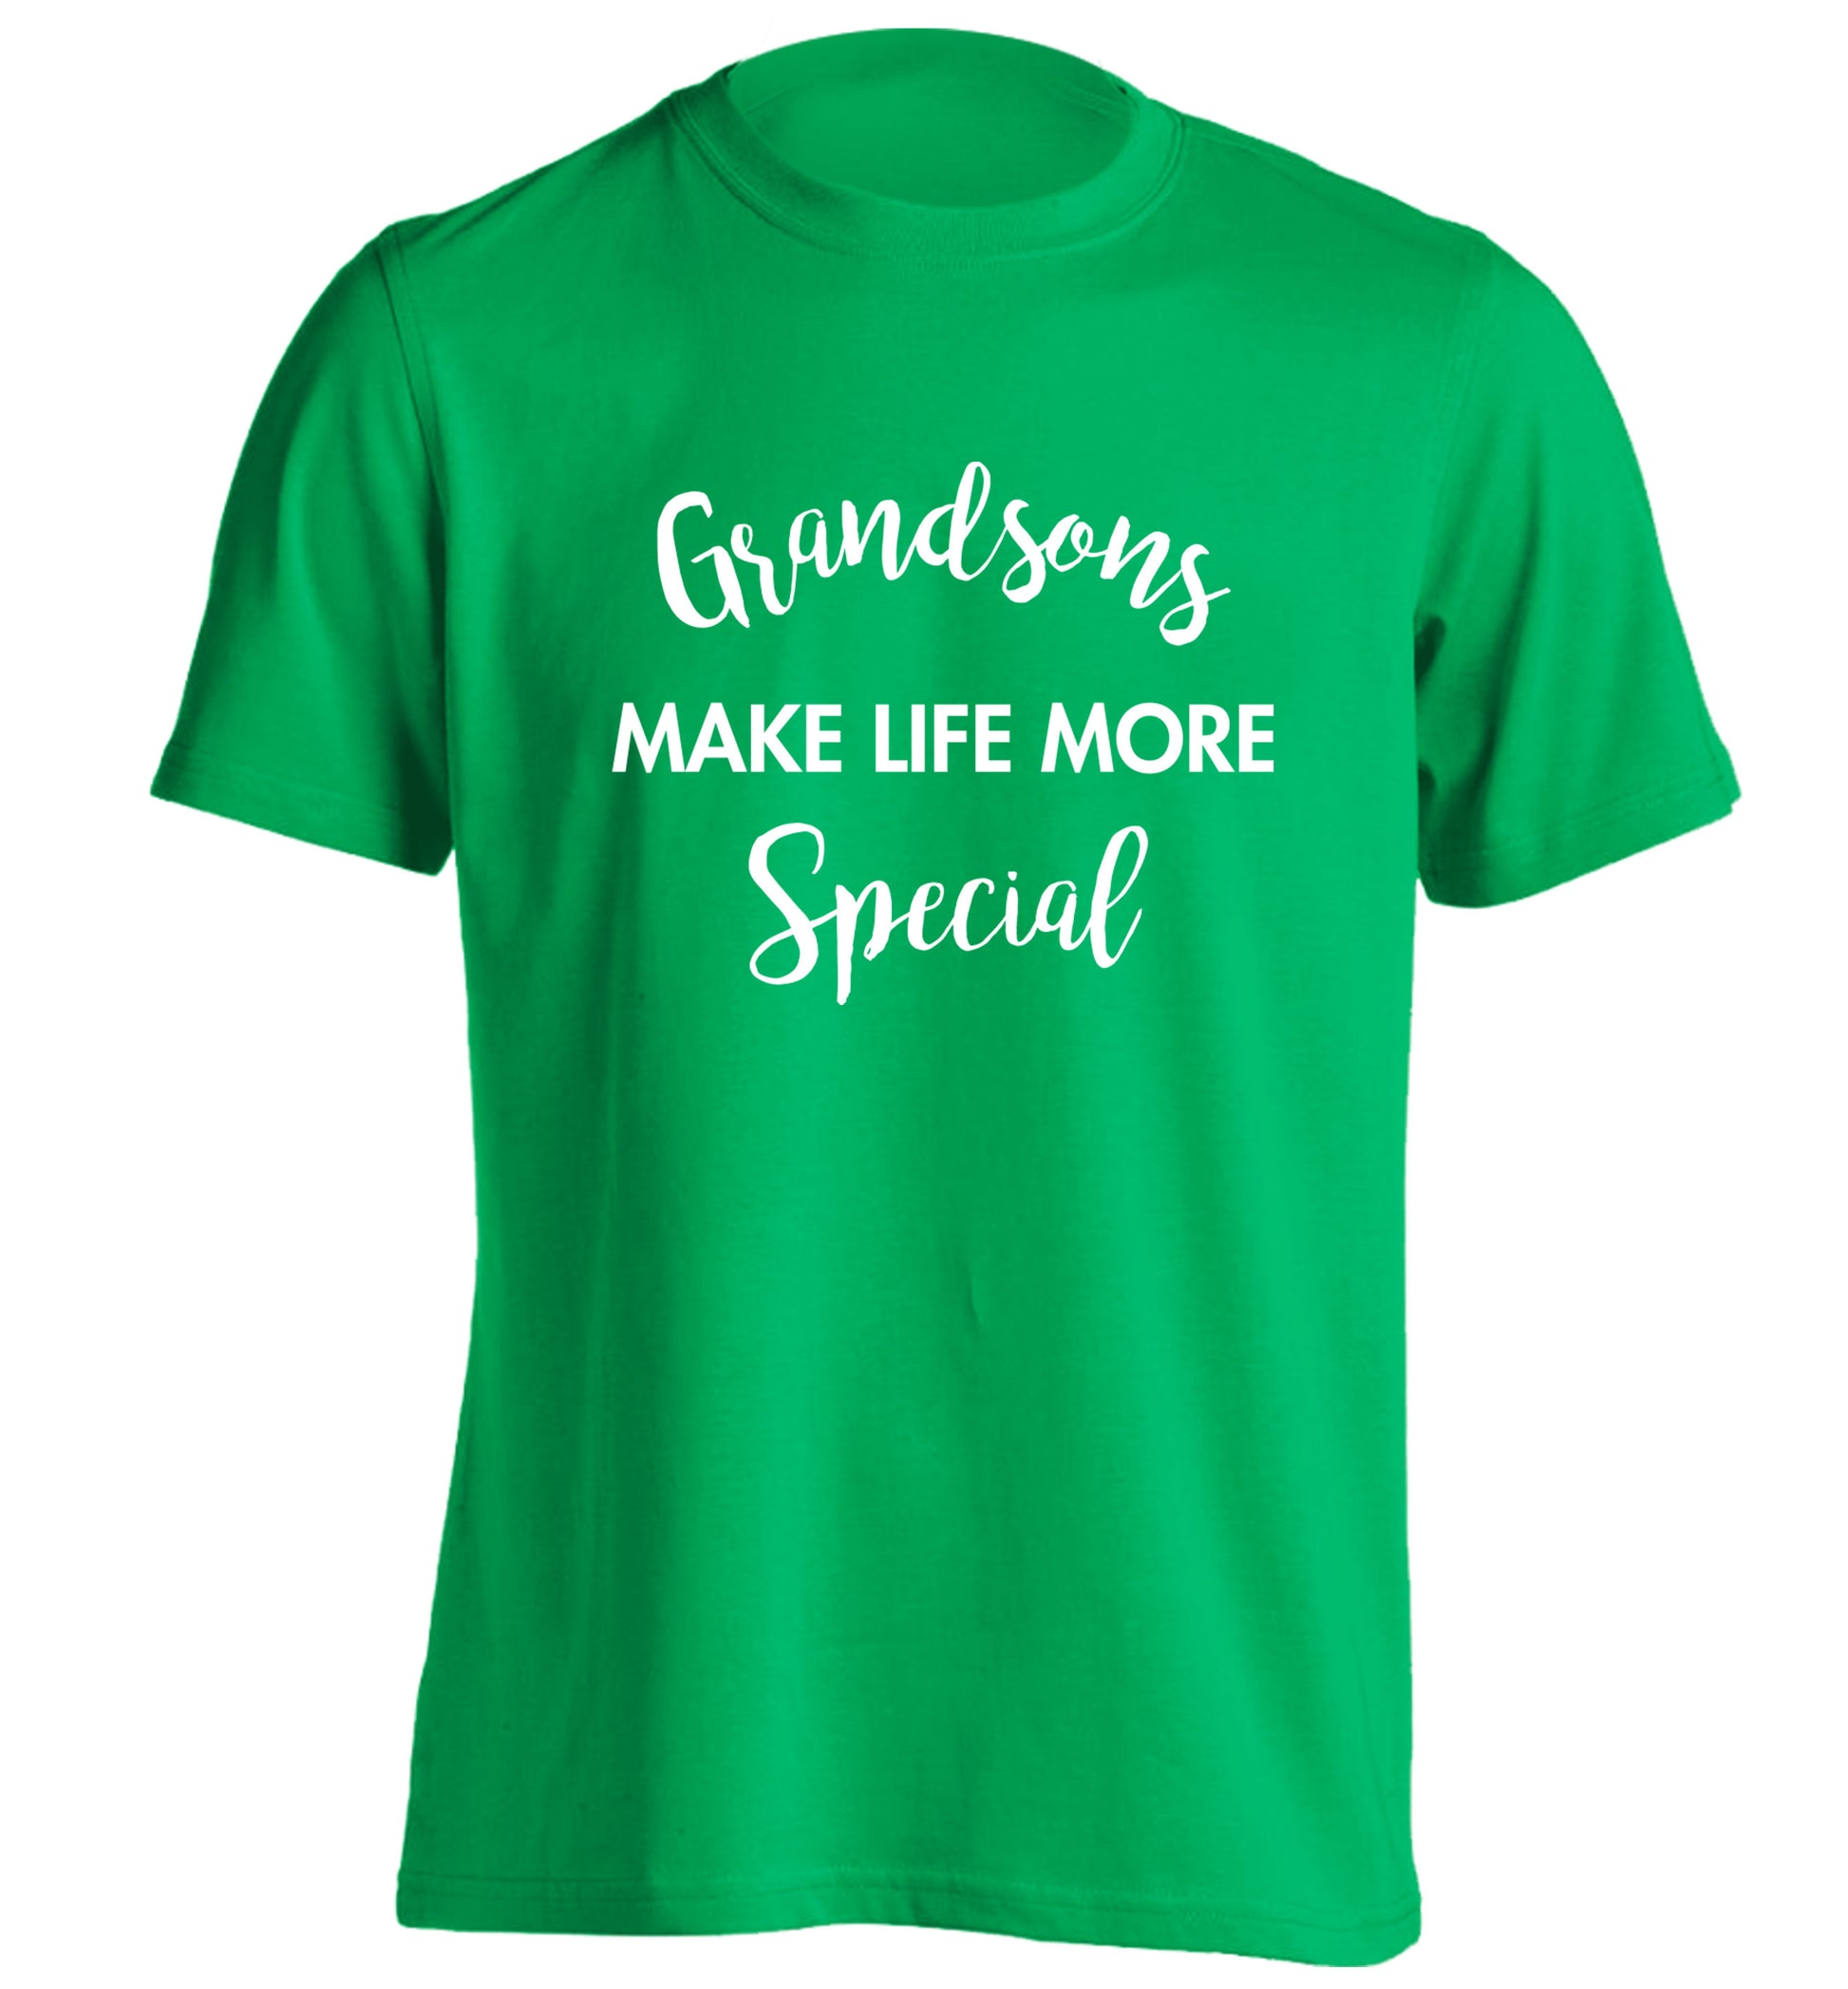 Grandsons make life more special adults unisex green Tshirt 2XL